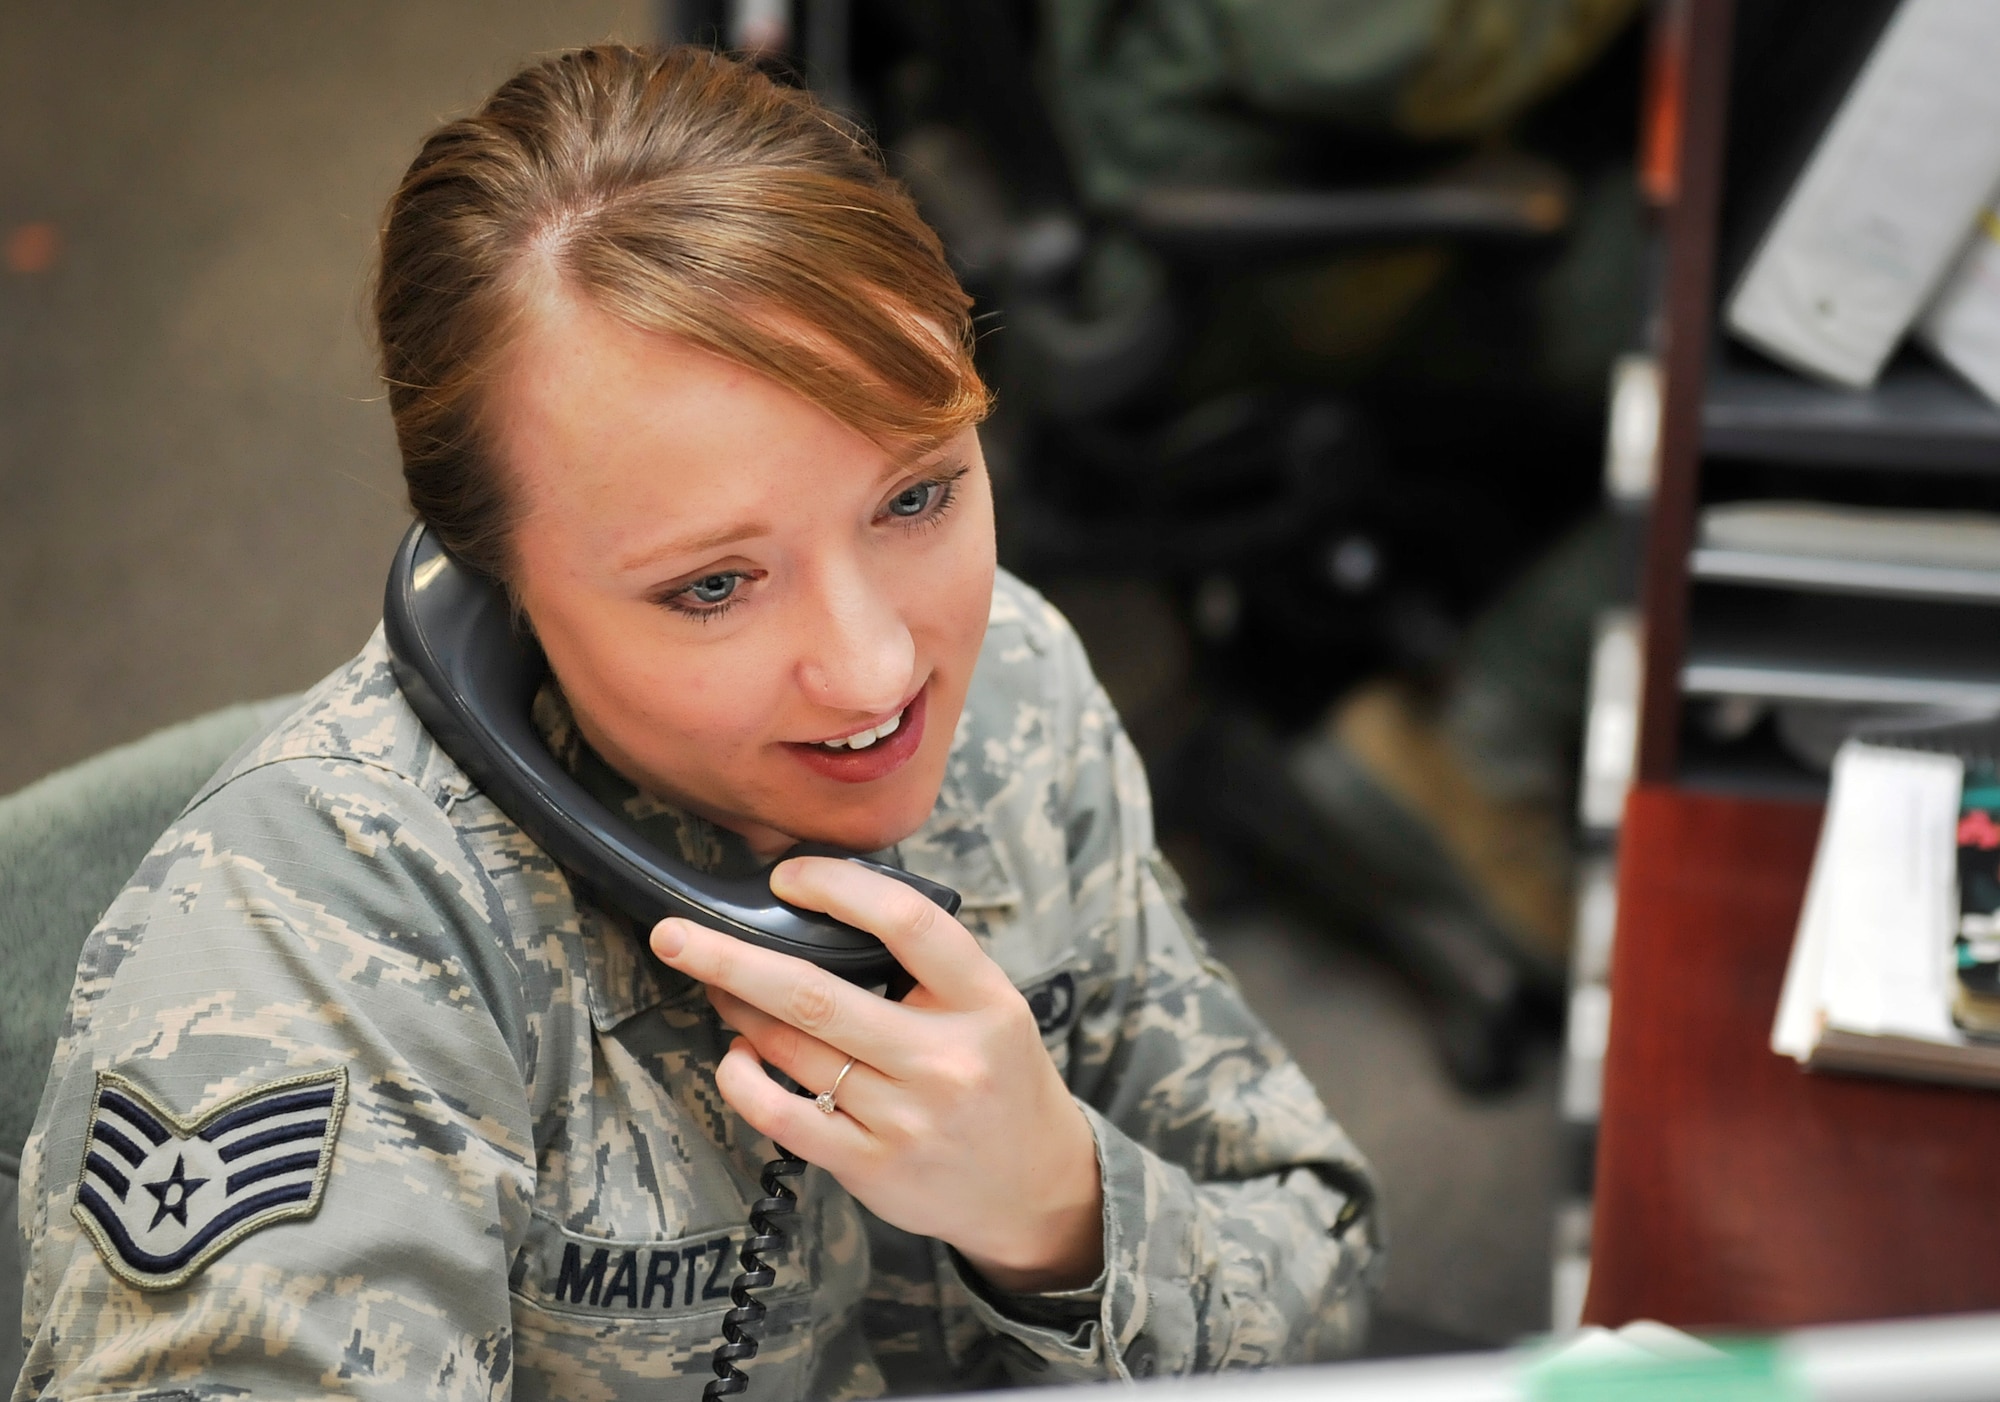 Staff Sgt. Joy Martz, 603rd Air and Space Operations Center Air Mobility Division NCO in charge of training, makes a phone call Feb. 19, 2016, at Ramstein Air Base, Germany. Martz is from Fort Collins, Colorado and joined the Air Force in 2010. She has been stationed at Cannon Air Force Base, New Mexico, Incirlik Air Base, Turkey and now Ramstein Air Base, Germany. (U.S. Air Force photo/Airman 1st Class Larissa Greatwood)